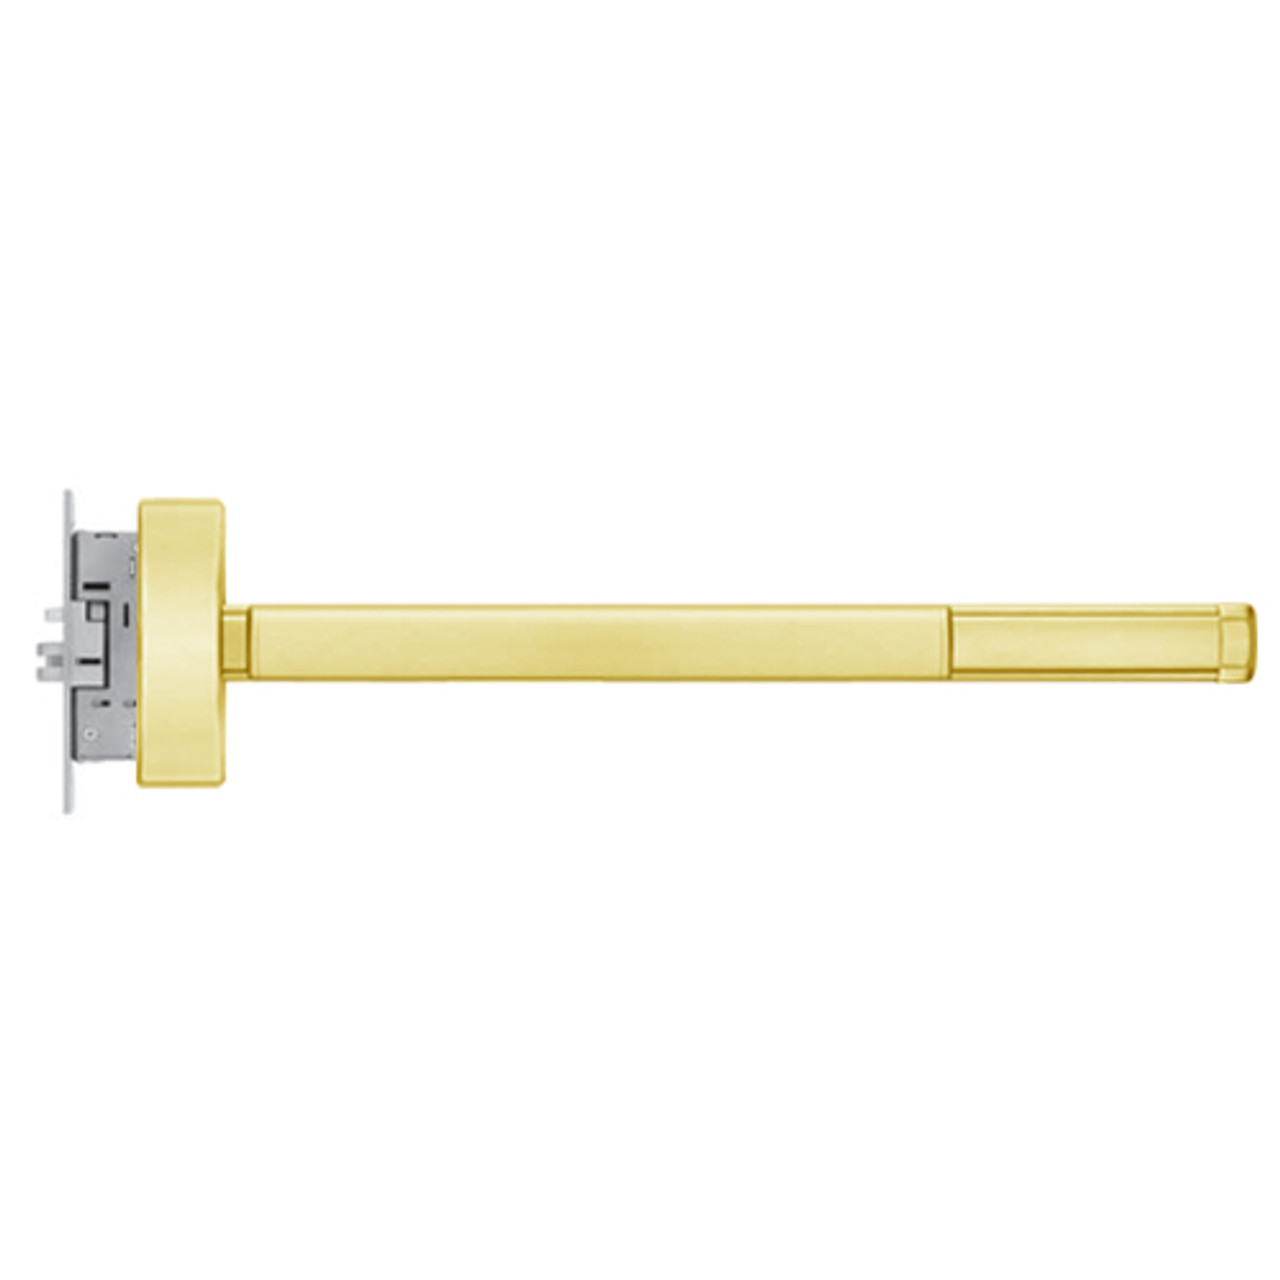 MLRFL2308-LHR-605-48 PHI 2300 Series Fire Rated Apex Mortise Exit Device with Motorized Latch Retraction Prepped for Key Controls Lever/Knob in Bright Brass Finish